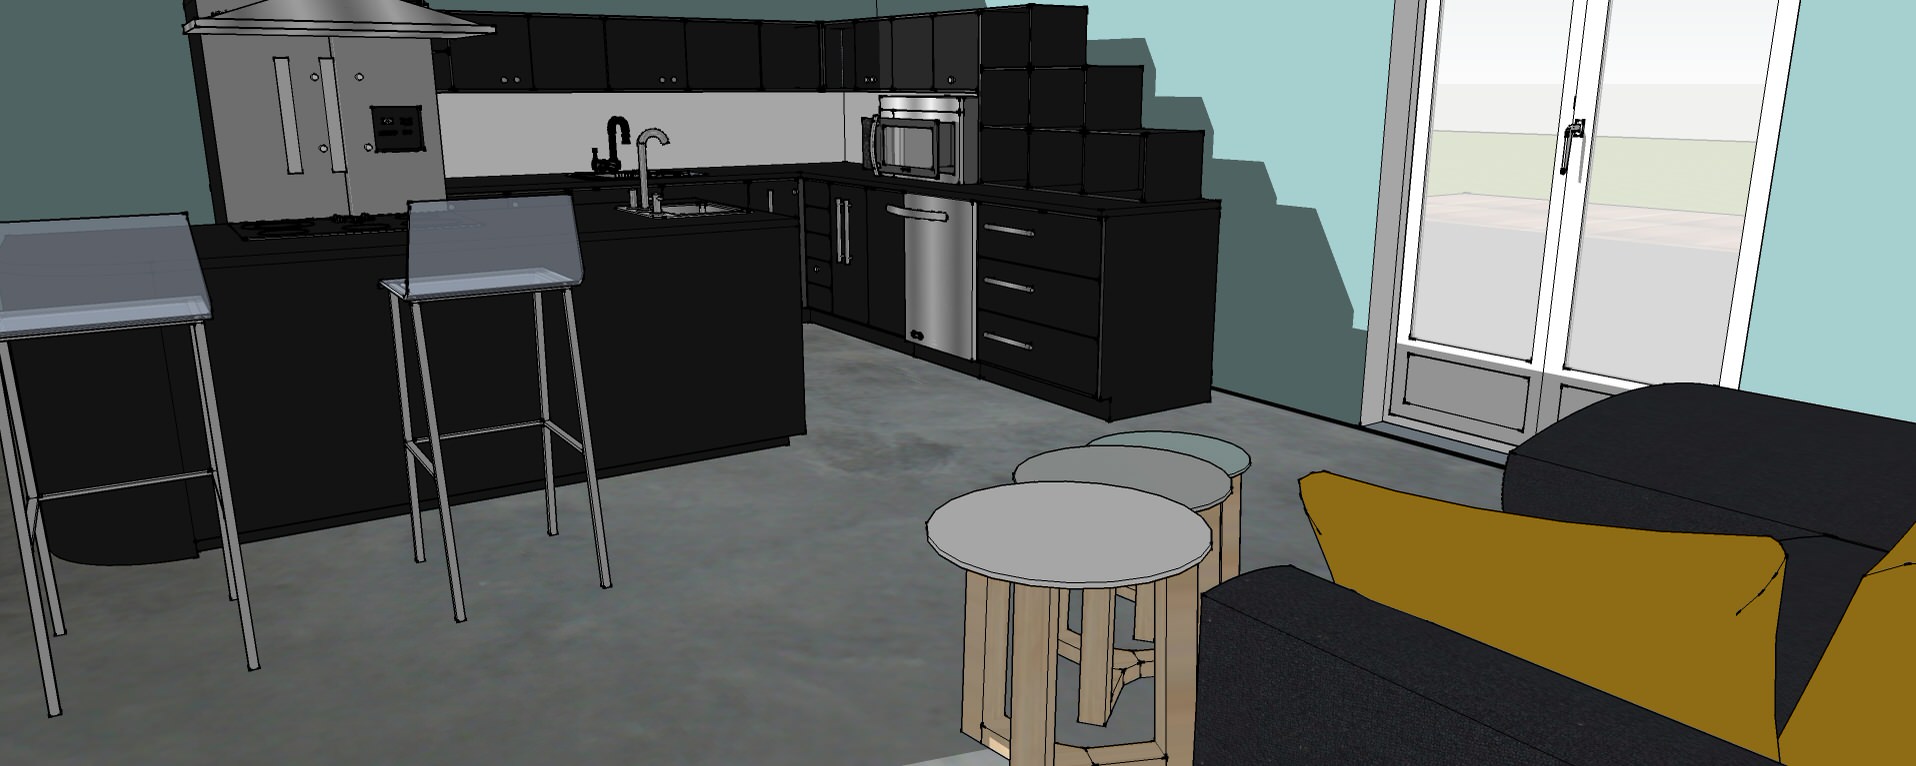 projet sous sketchup